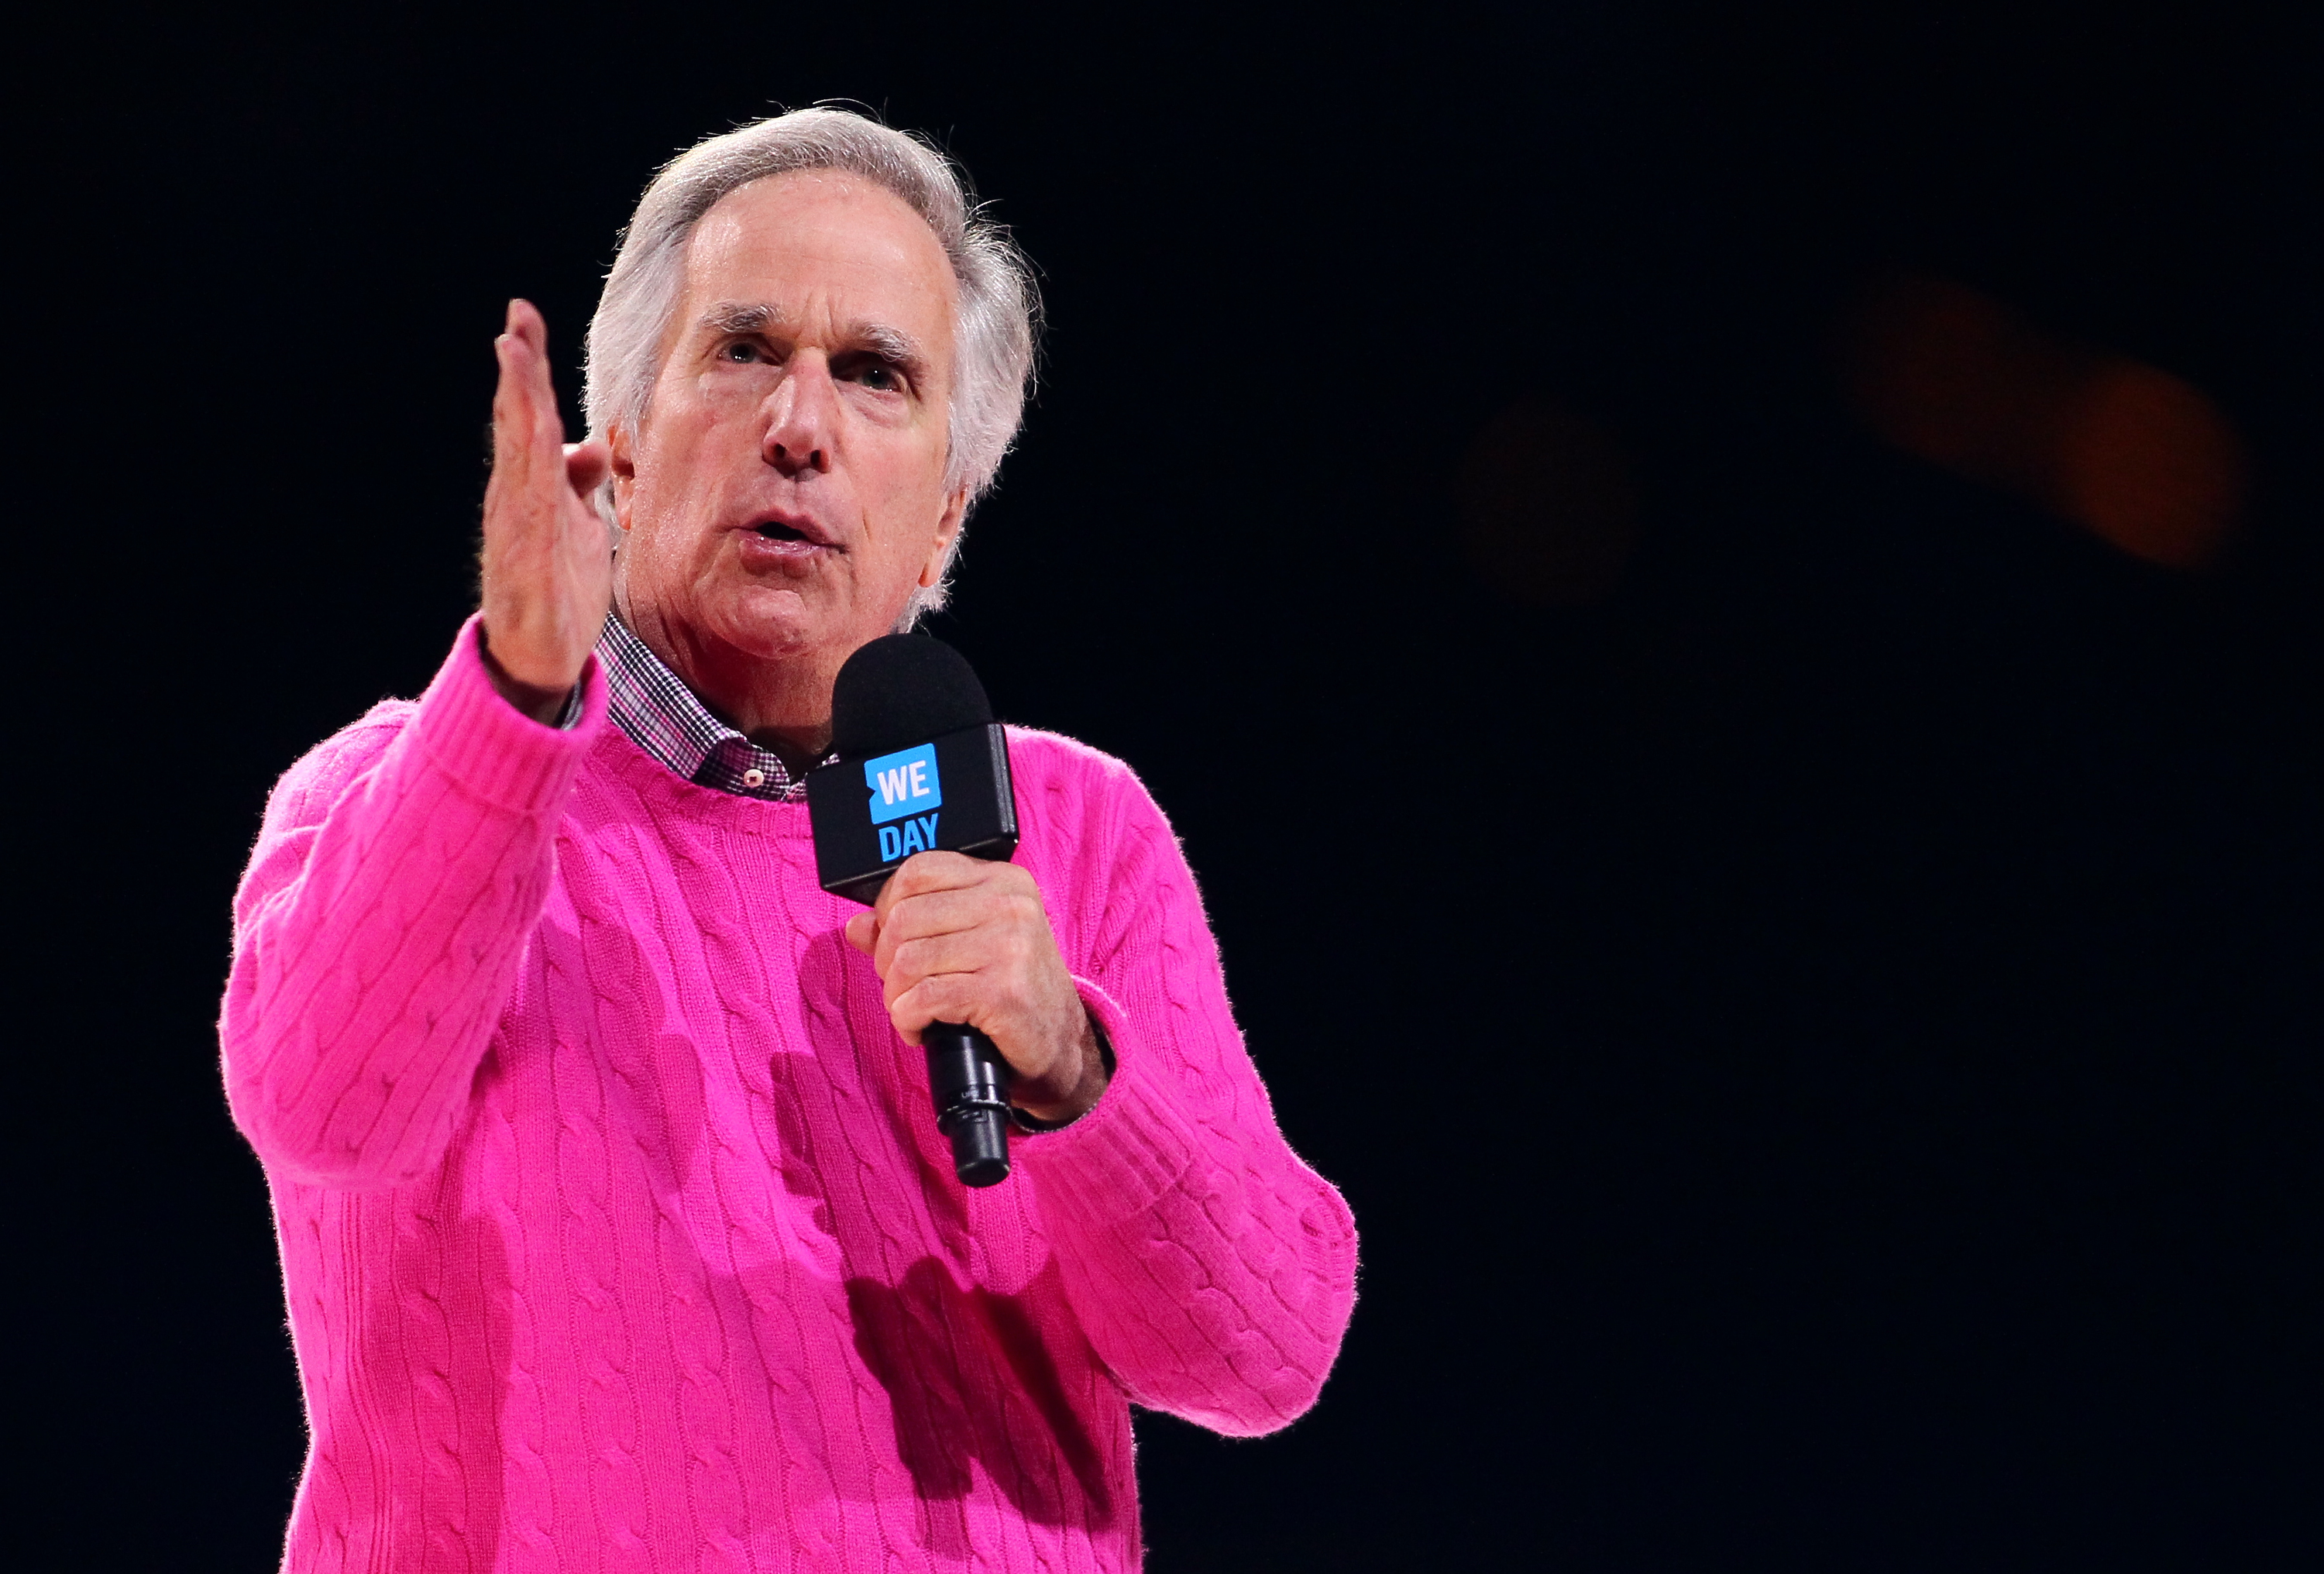 We Day 2015 ST. PAUL, MN - NOVEMBER 03: Actor, director, producer and author, Henry Winkler, inspires 18,000 students and educators at WE Day Minnesota at the Xcel Energy Center on November 3, 2015. (Photo by Adam Bettcher/ Getty Images for We Day) ***LOCAL CAPTION *** Henry Winkler